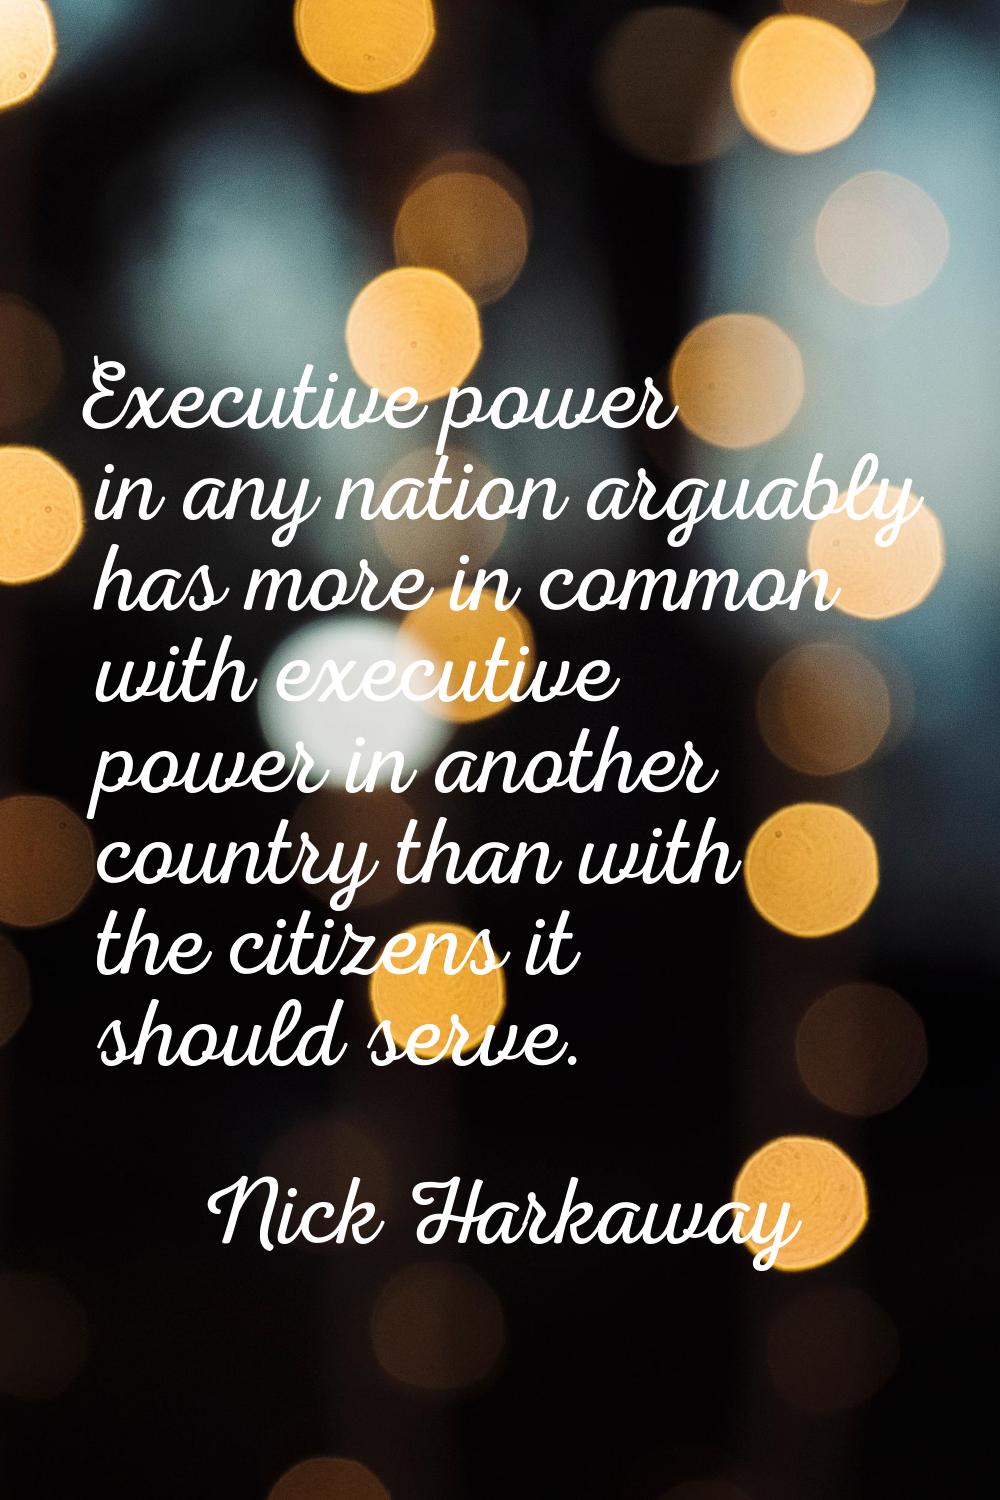 Executive power in any nation arguably has more in common with executive power in another country t